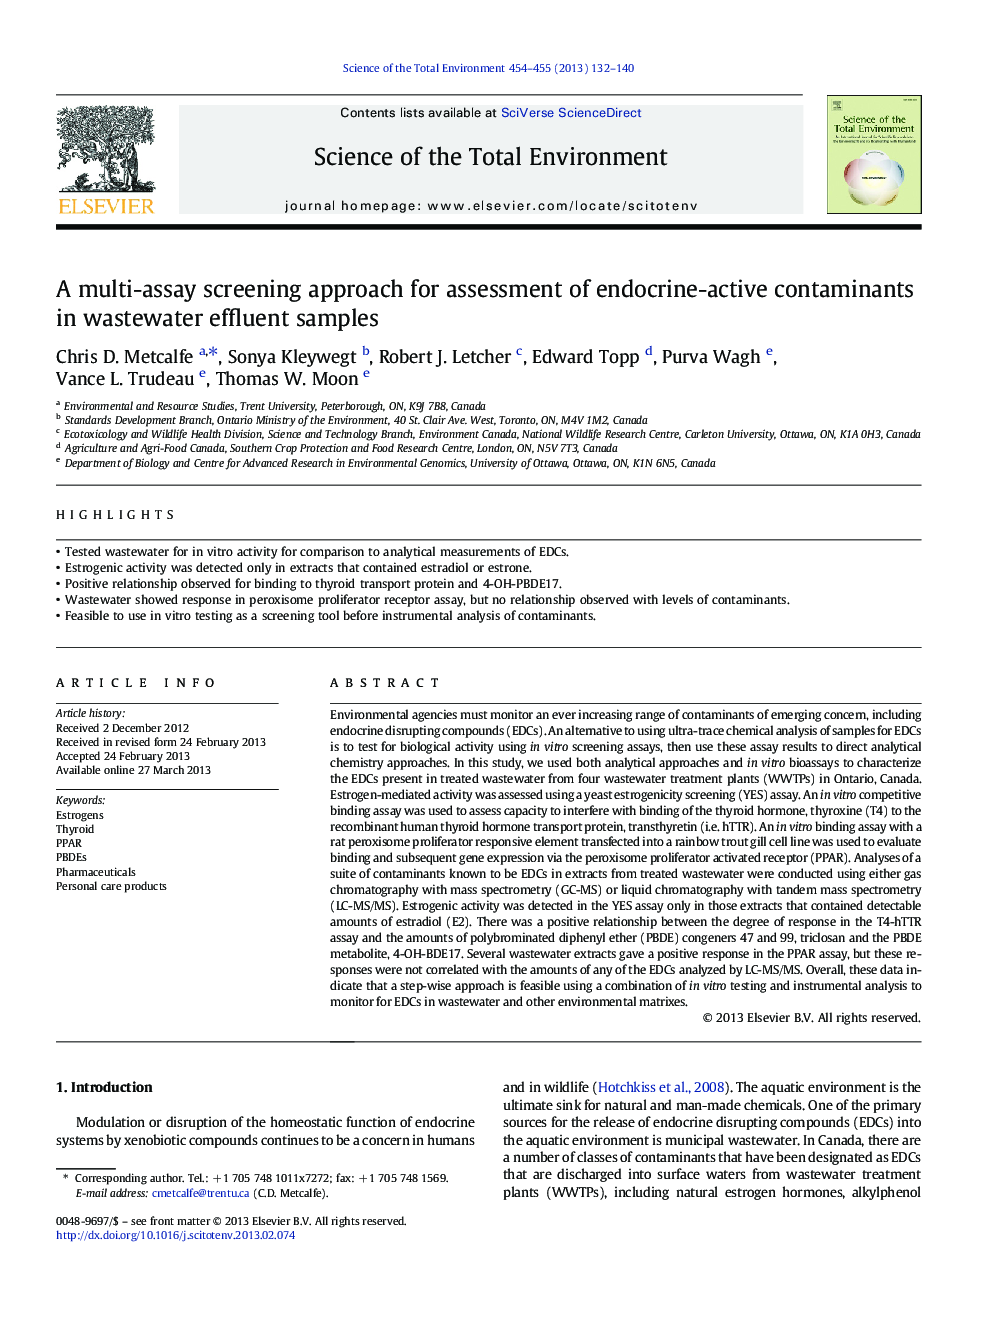 A multi-assay screening approach for assessment of endocrine-active contaminants in wastewater effluent samples